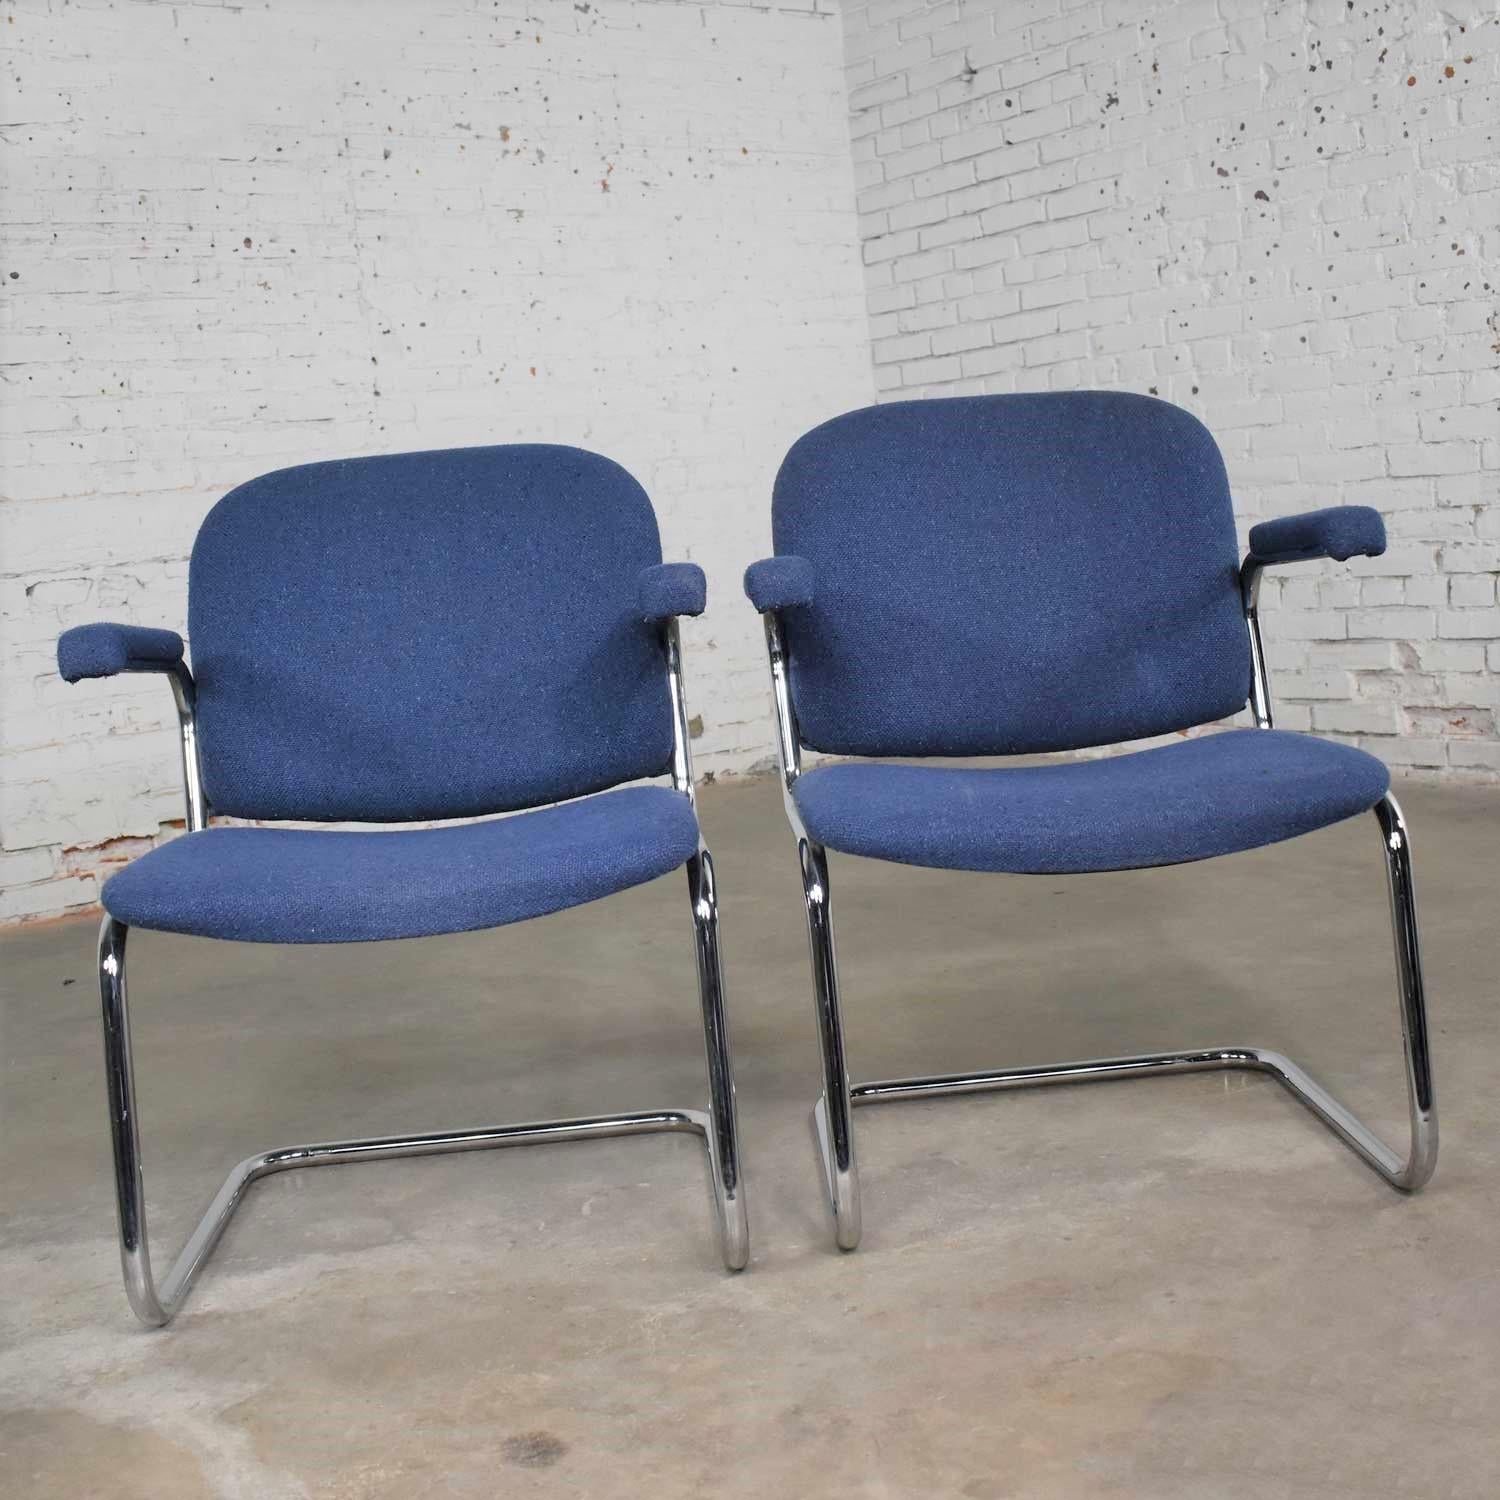 Tubular Chrome and Blue Fabric Cantilever Lounge Chair with Arms Set of 7 For Sale 2